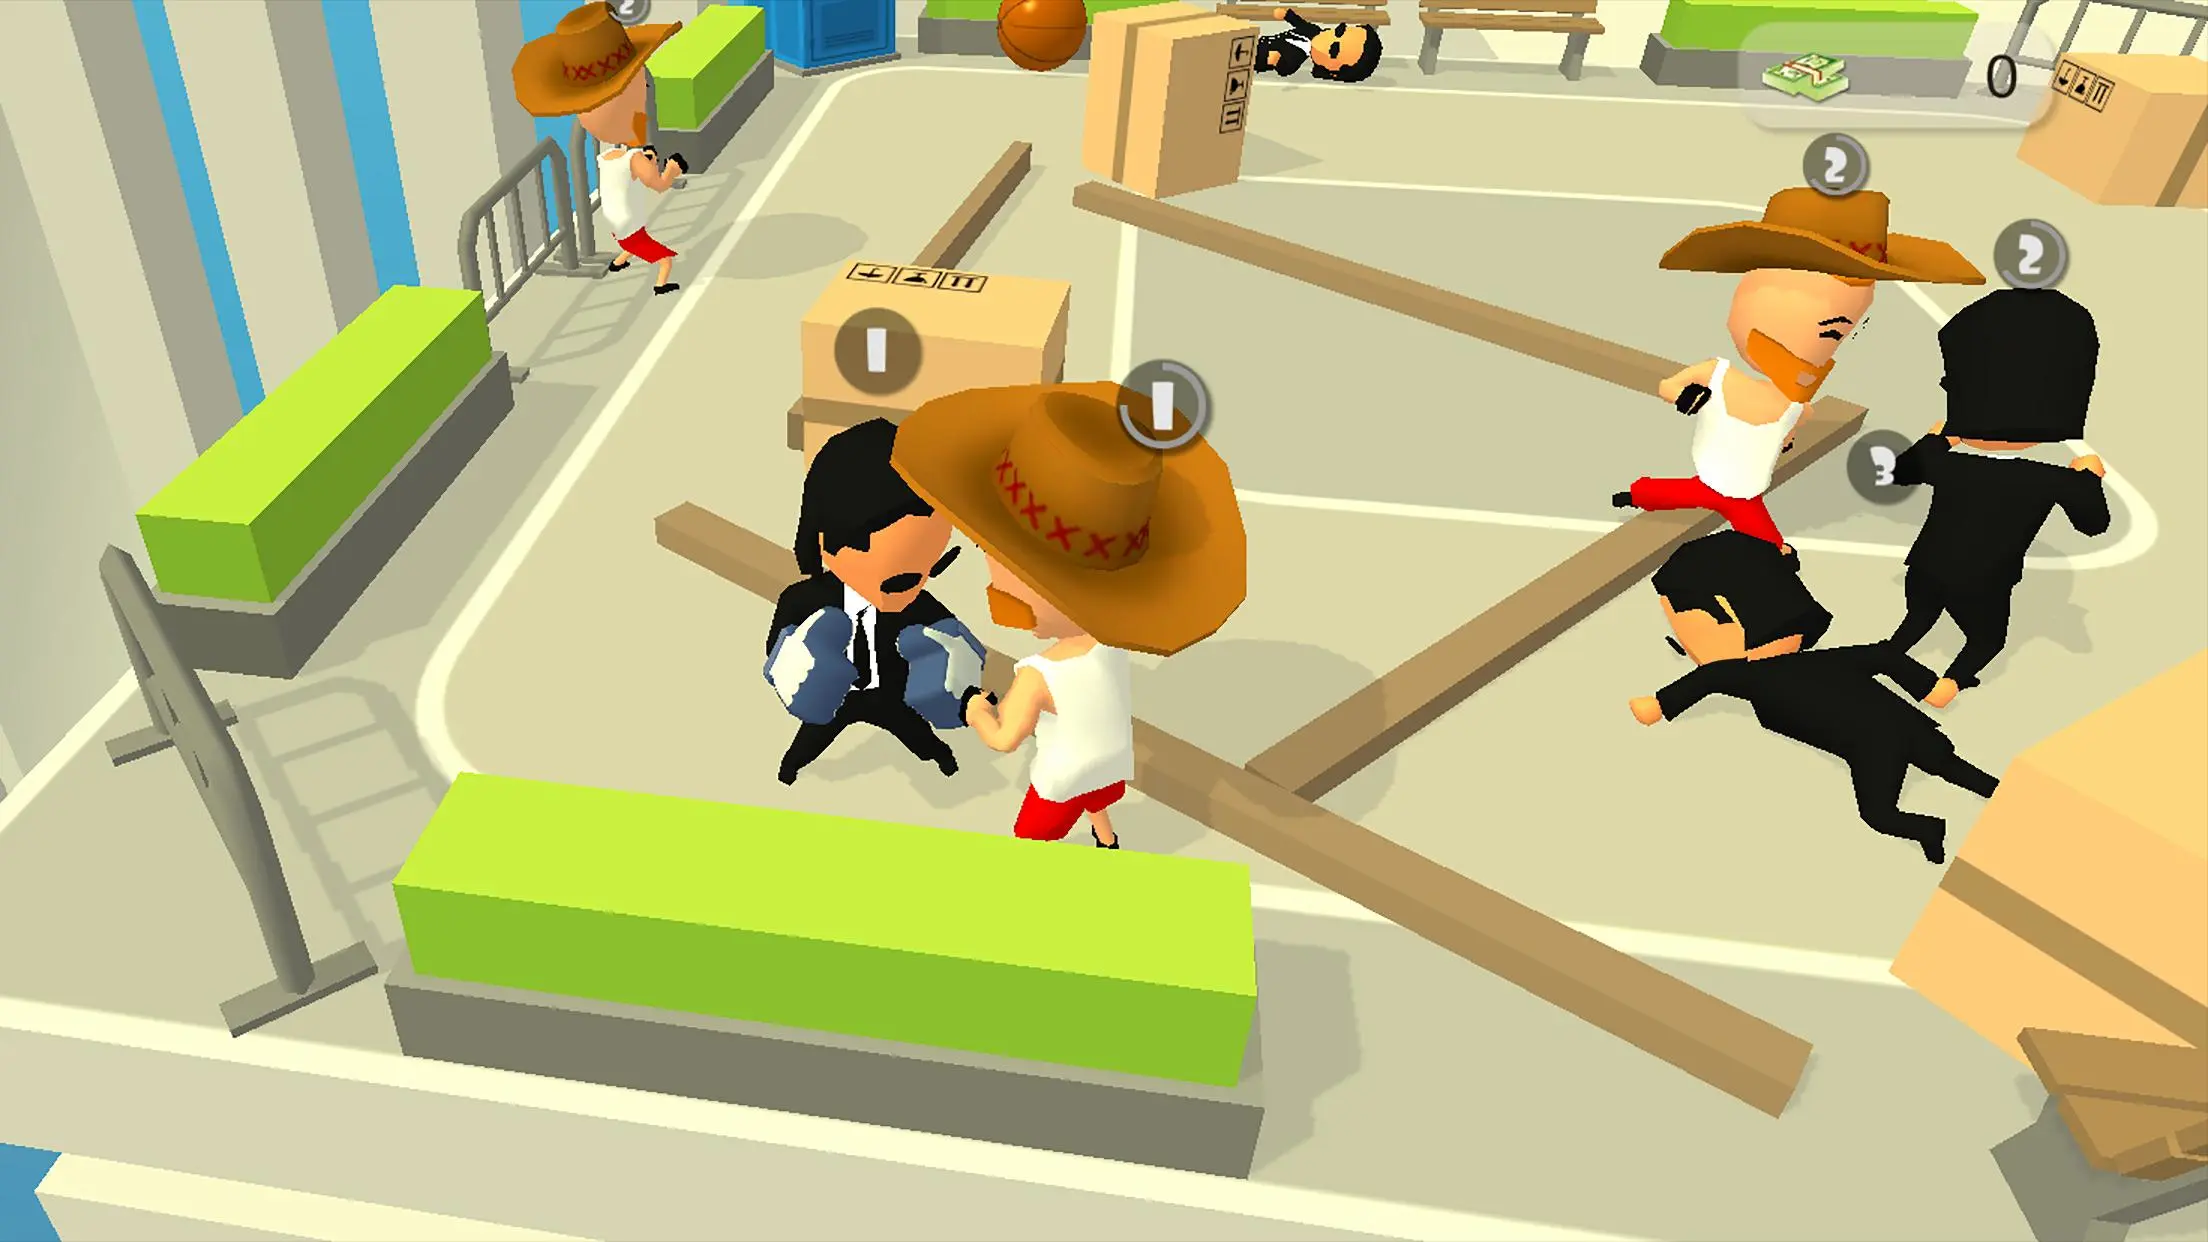 Download I, The One - Fun Fighting Game android on PC